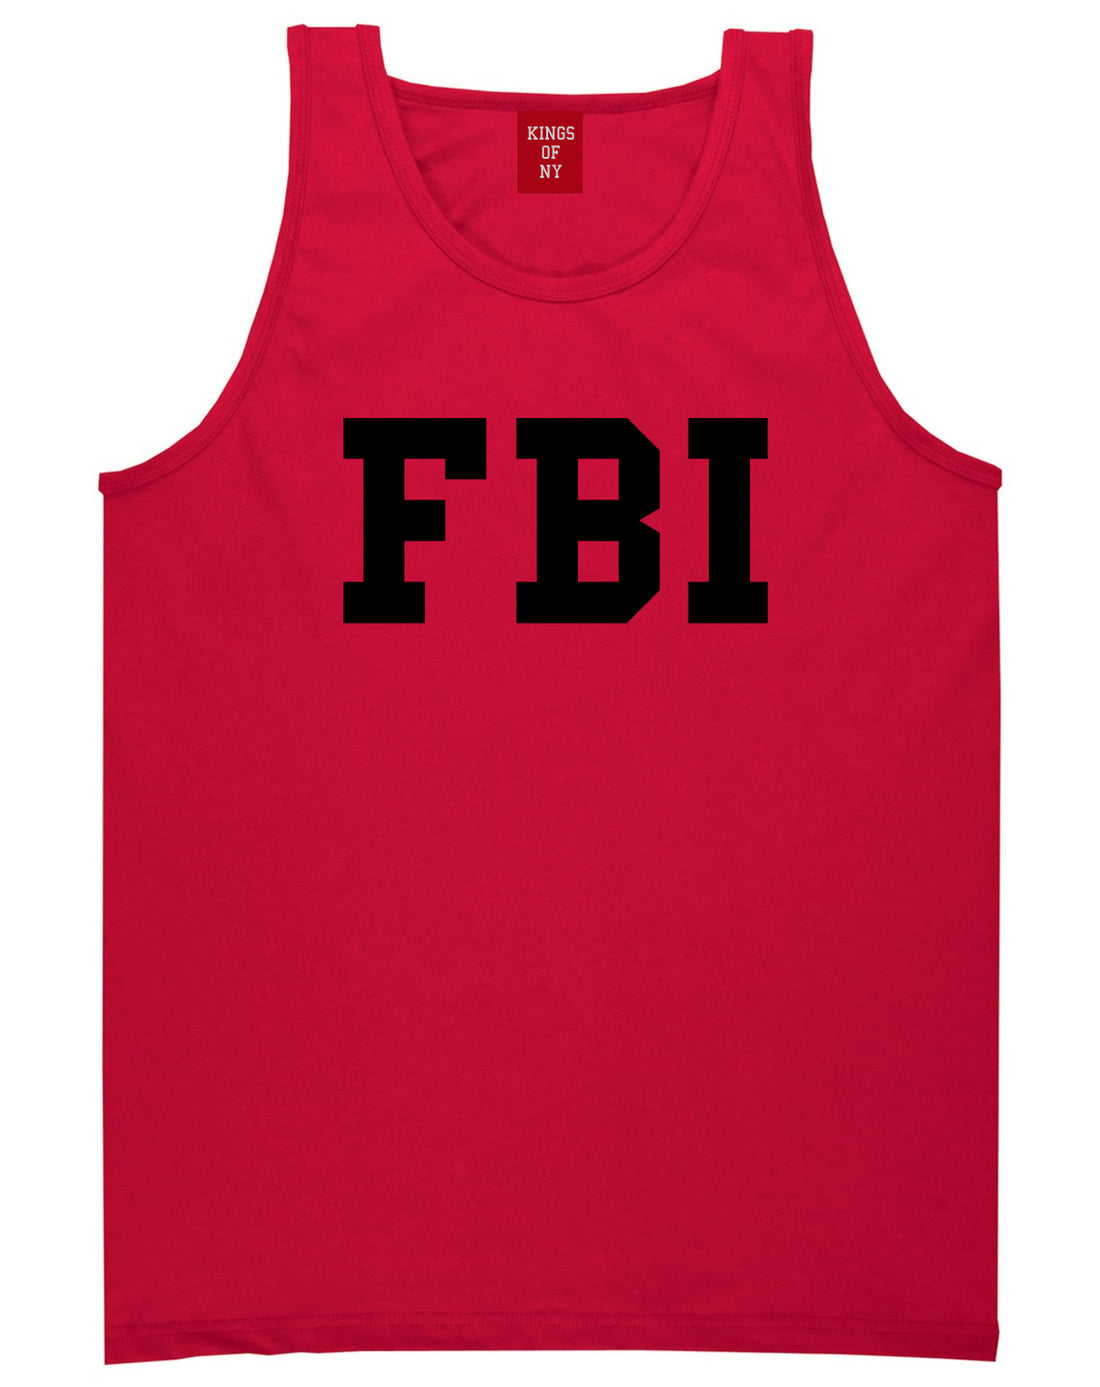 FBI Law Enforcement Mens Red Tank Top Shirt by KINGS OF NY